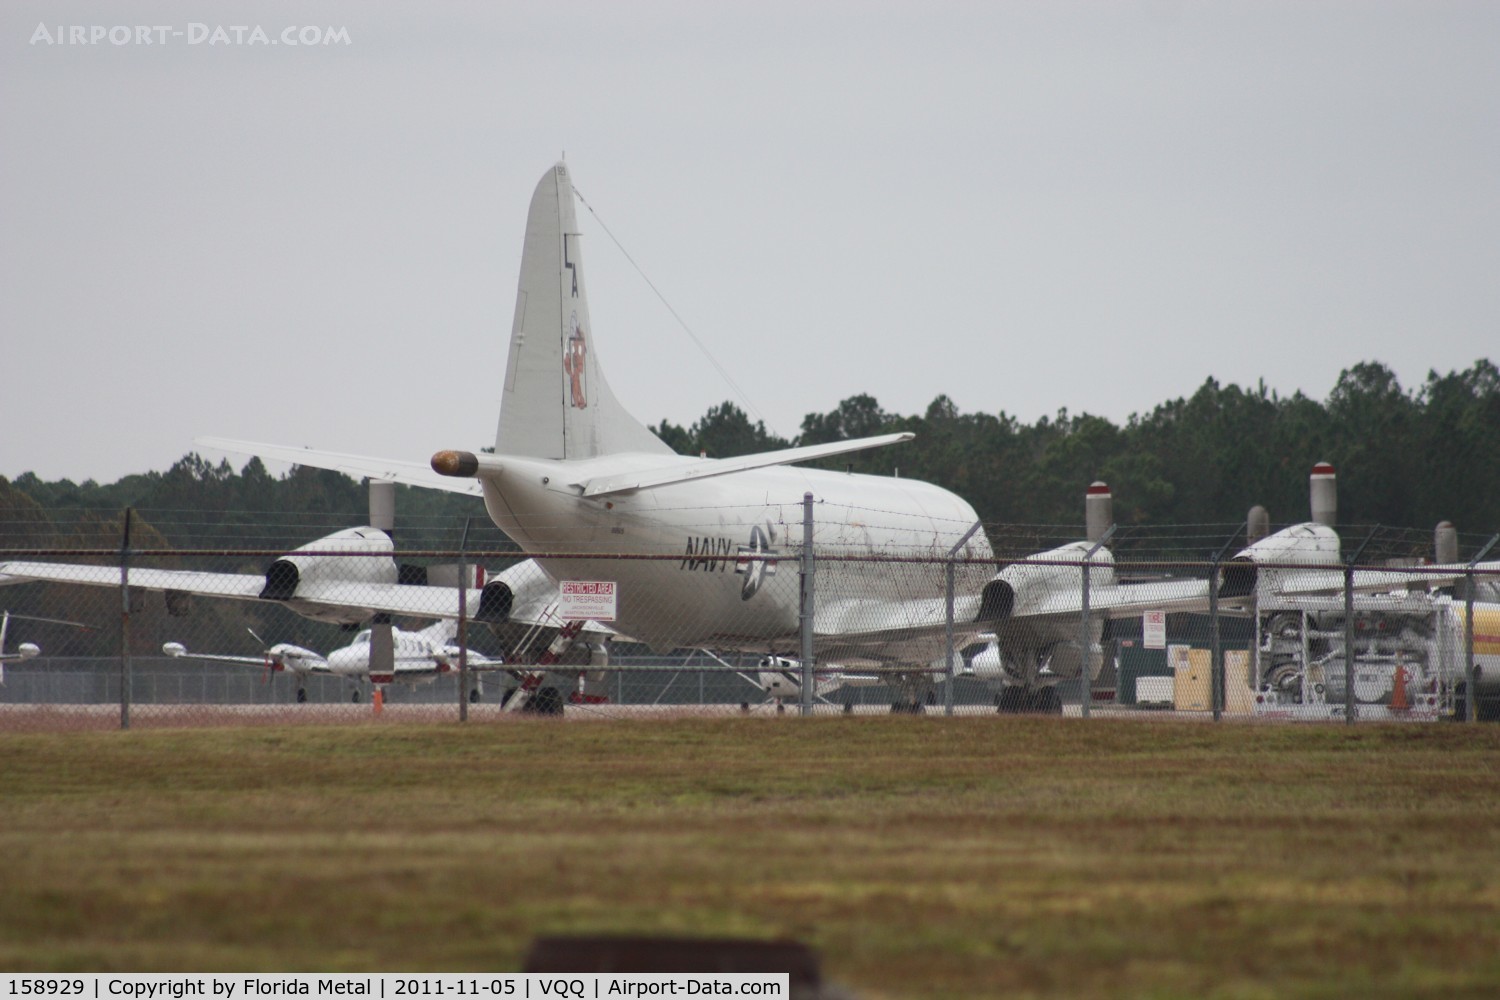 158929, Lockheed P-3C Orion C/N 285A-5601, P-3C Orion